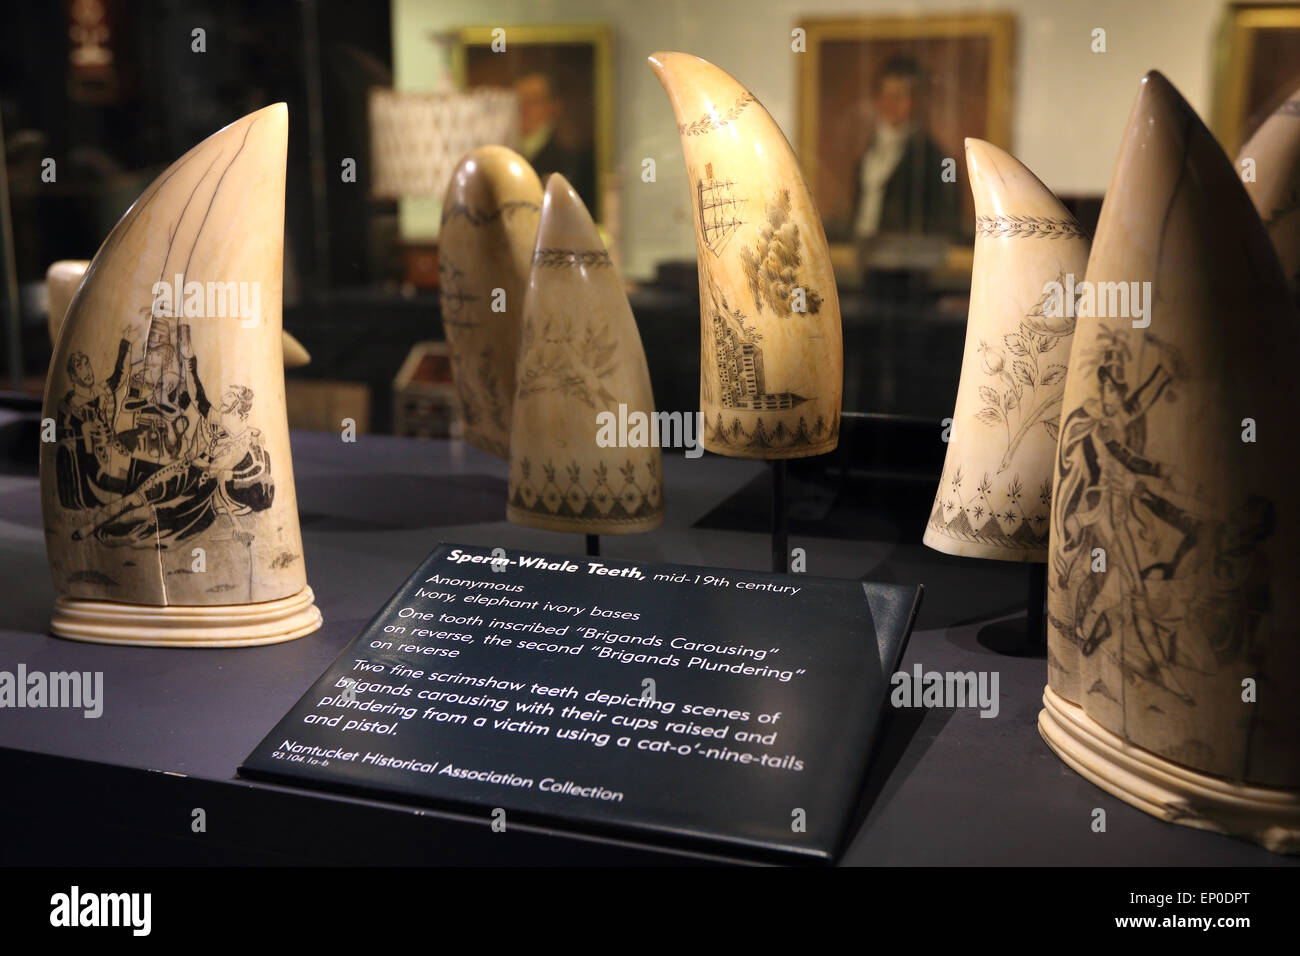 Nantucket Whaling museum. A display showing sperm whale teeth with scrimshaw carving, whalers in background. Nantucket Island. Massachusetts. Stock Photo